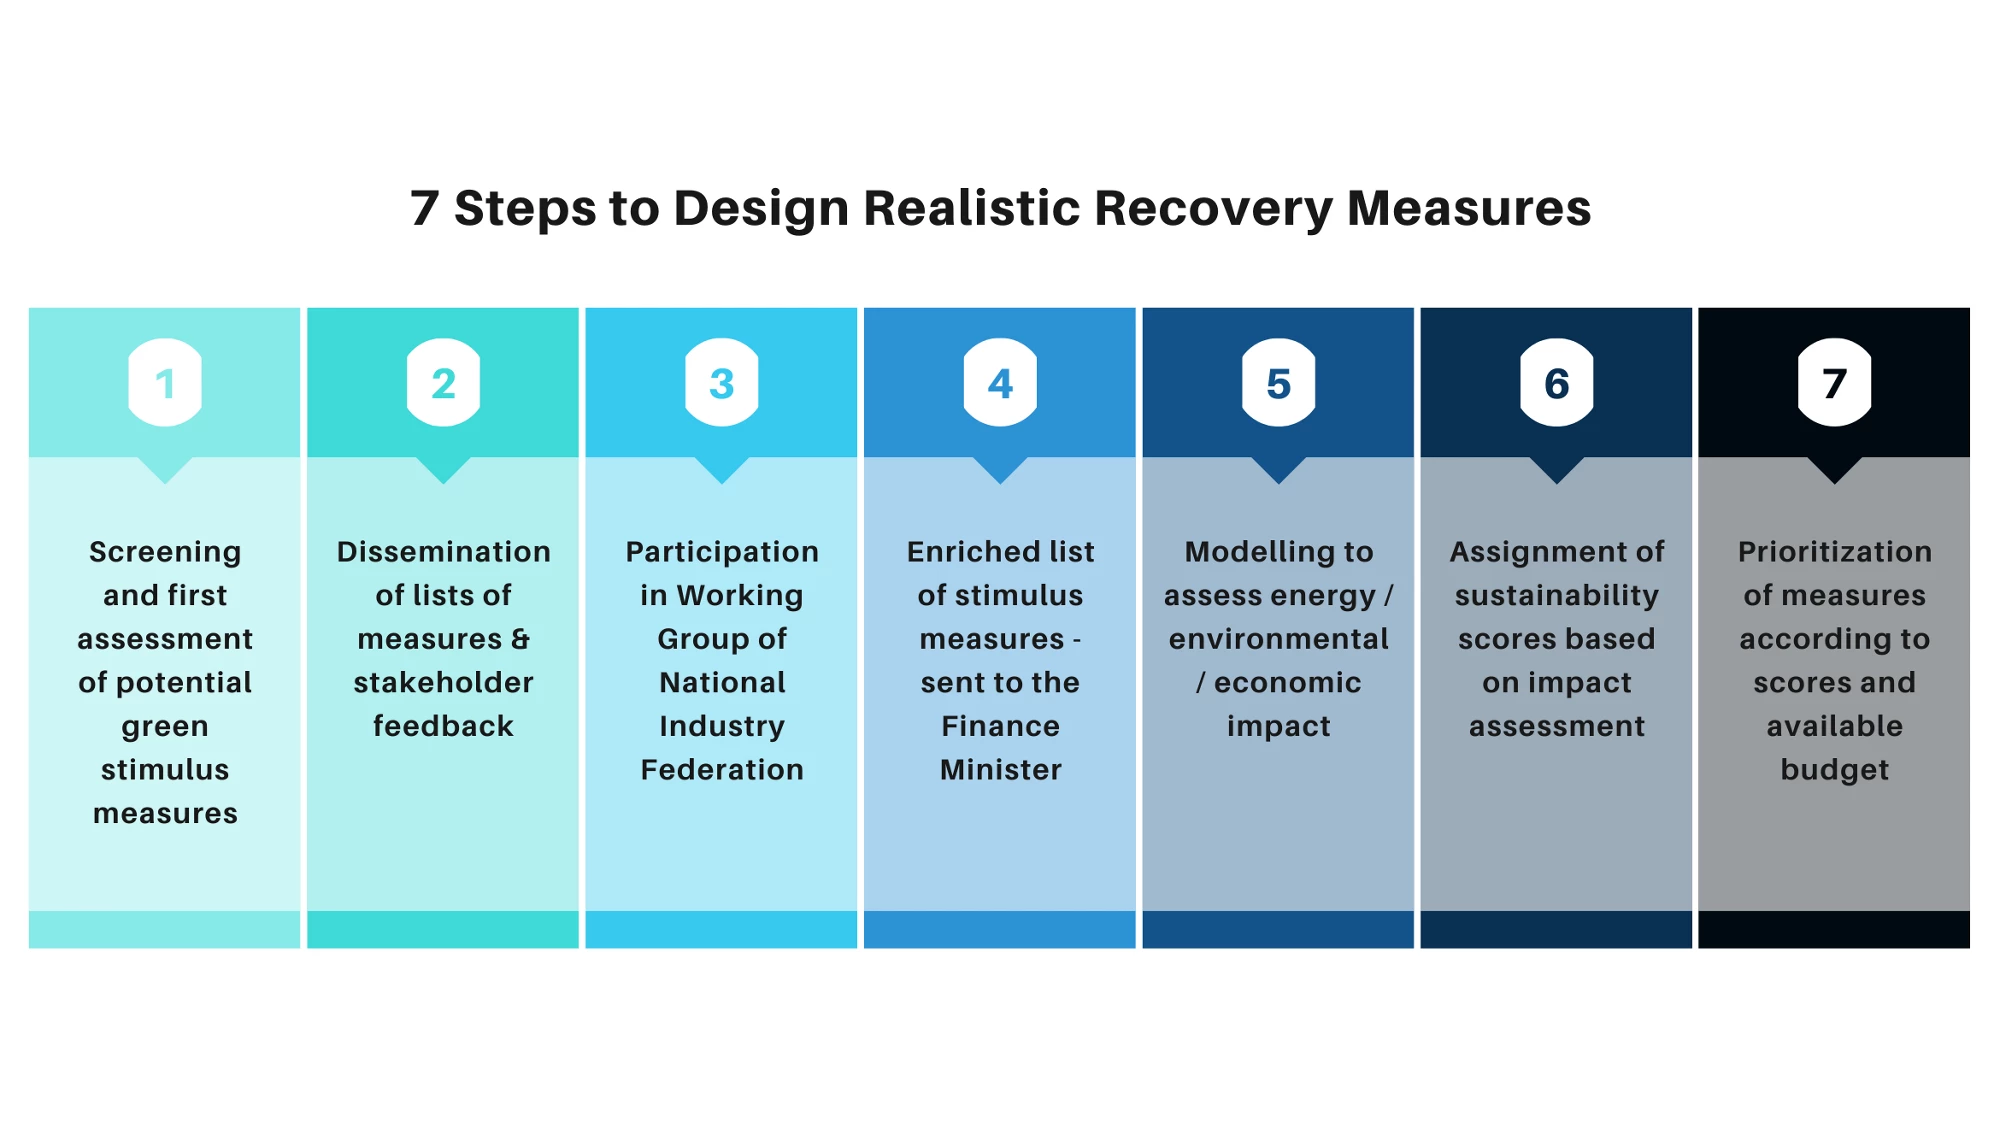 7 steps to design realistic COVID-19 recovery measures